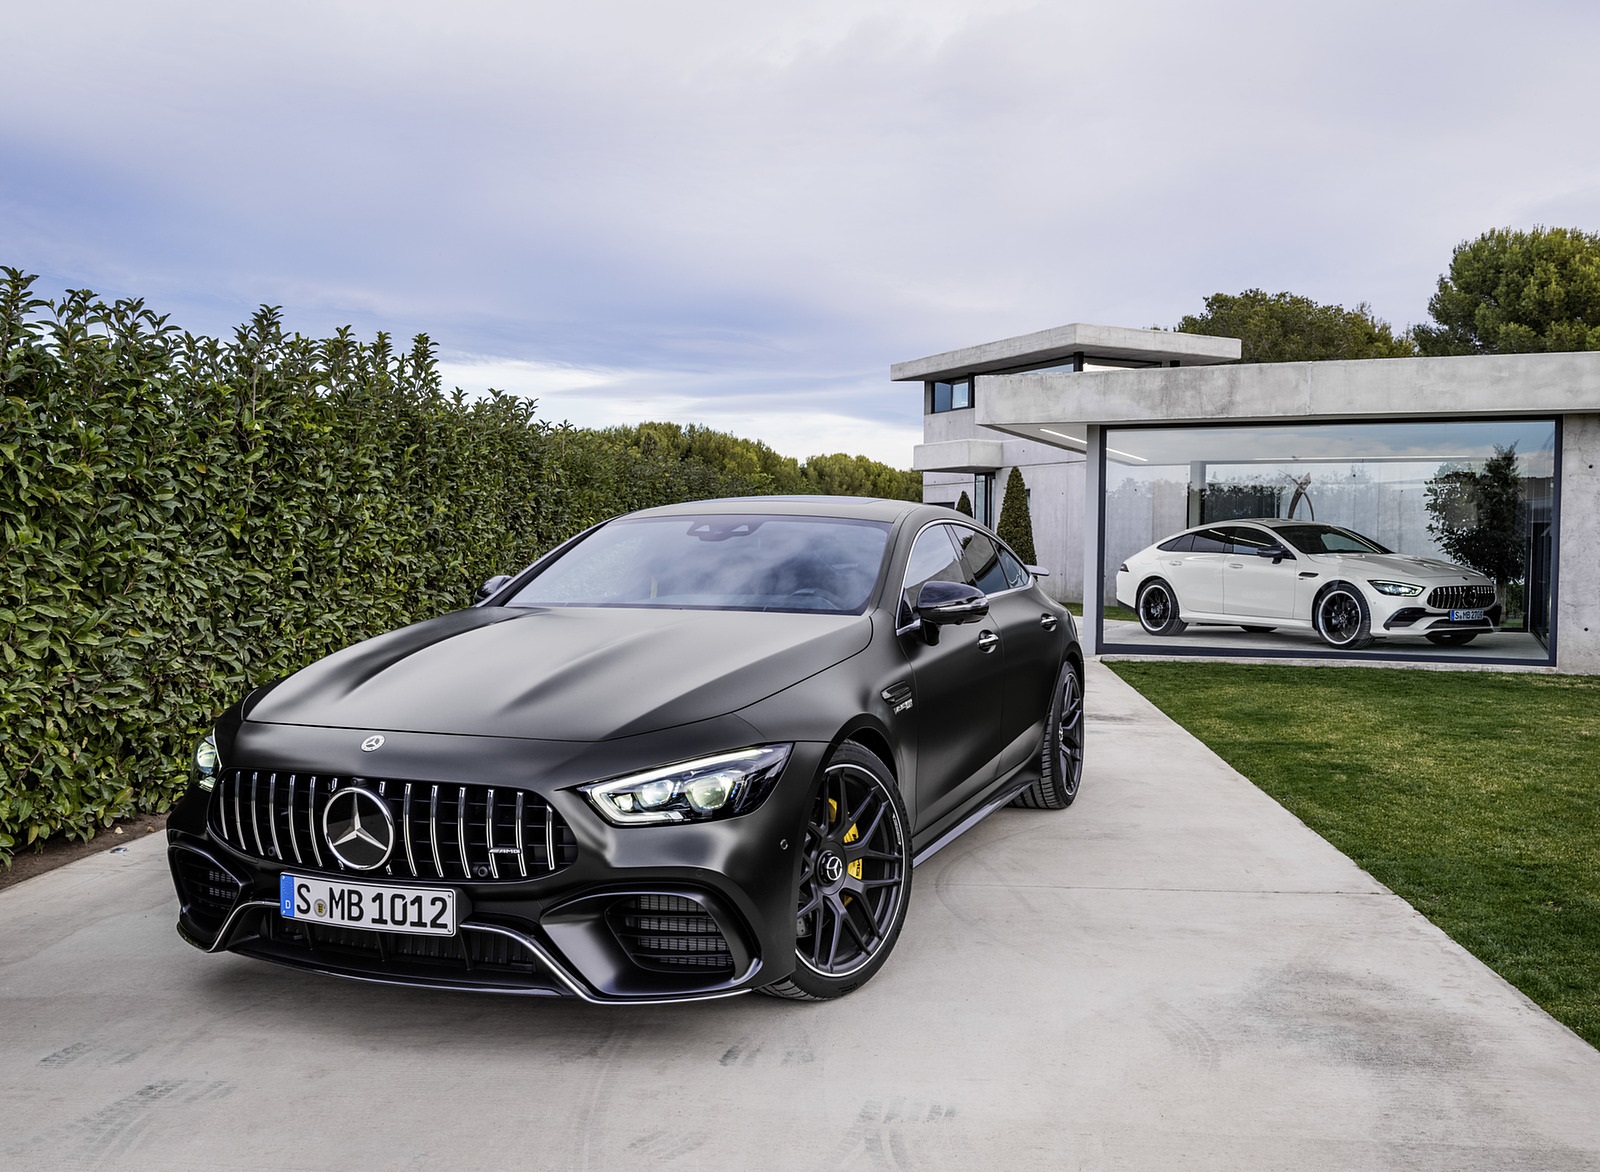 General 1600x1172 Mercedes-Benz car vehicle luxury cars Mercedes-AMG GT 4-door frontal view black cars